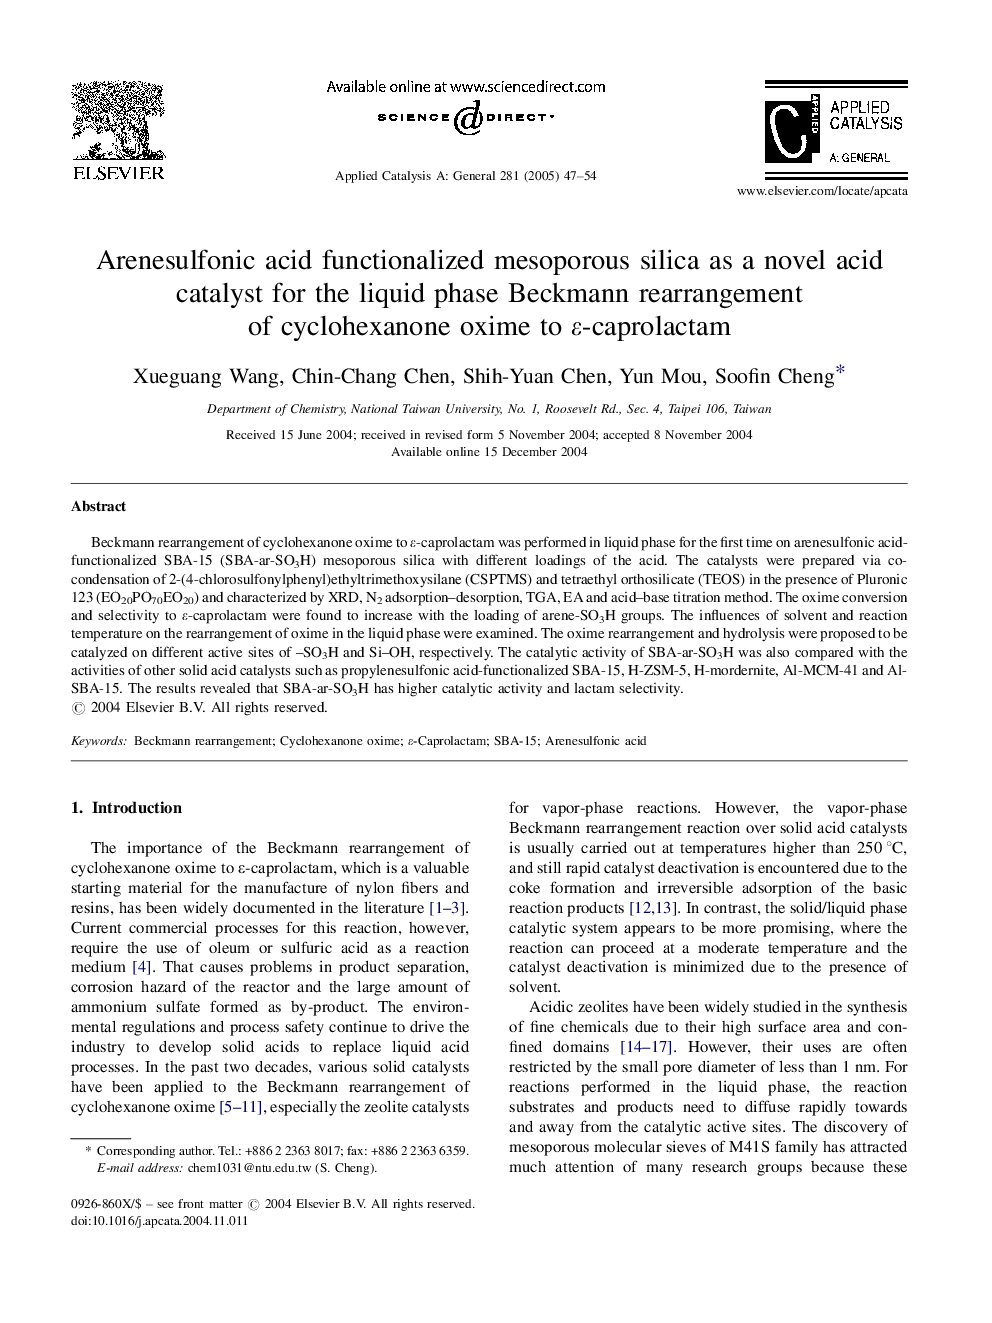 Arenesulfonic acid functionalized mesoporous silica as a novel acid catalyst for the liquid phase Beckmann rearrangement of cyclohexanone oxime to É-caprolactam